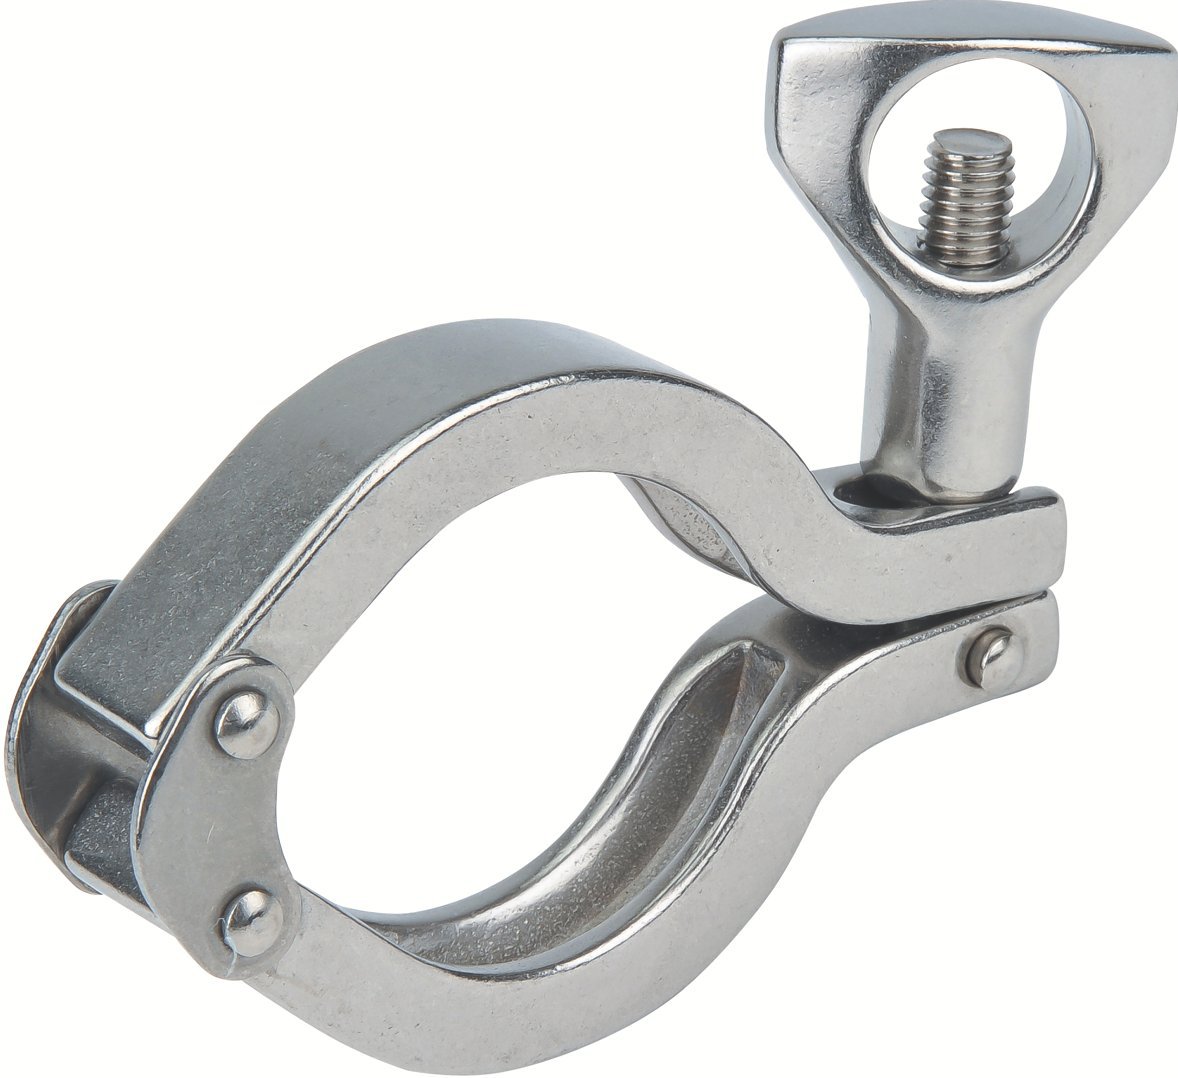 8356 - Collier clamp double agrafe - Inox 304.